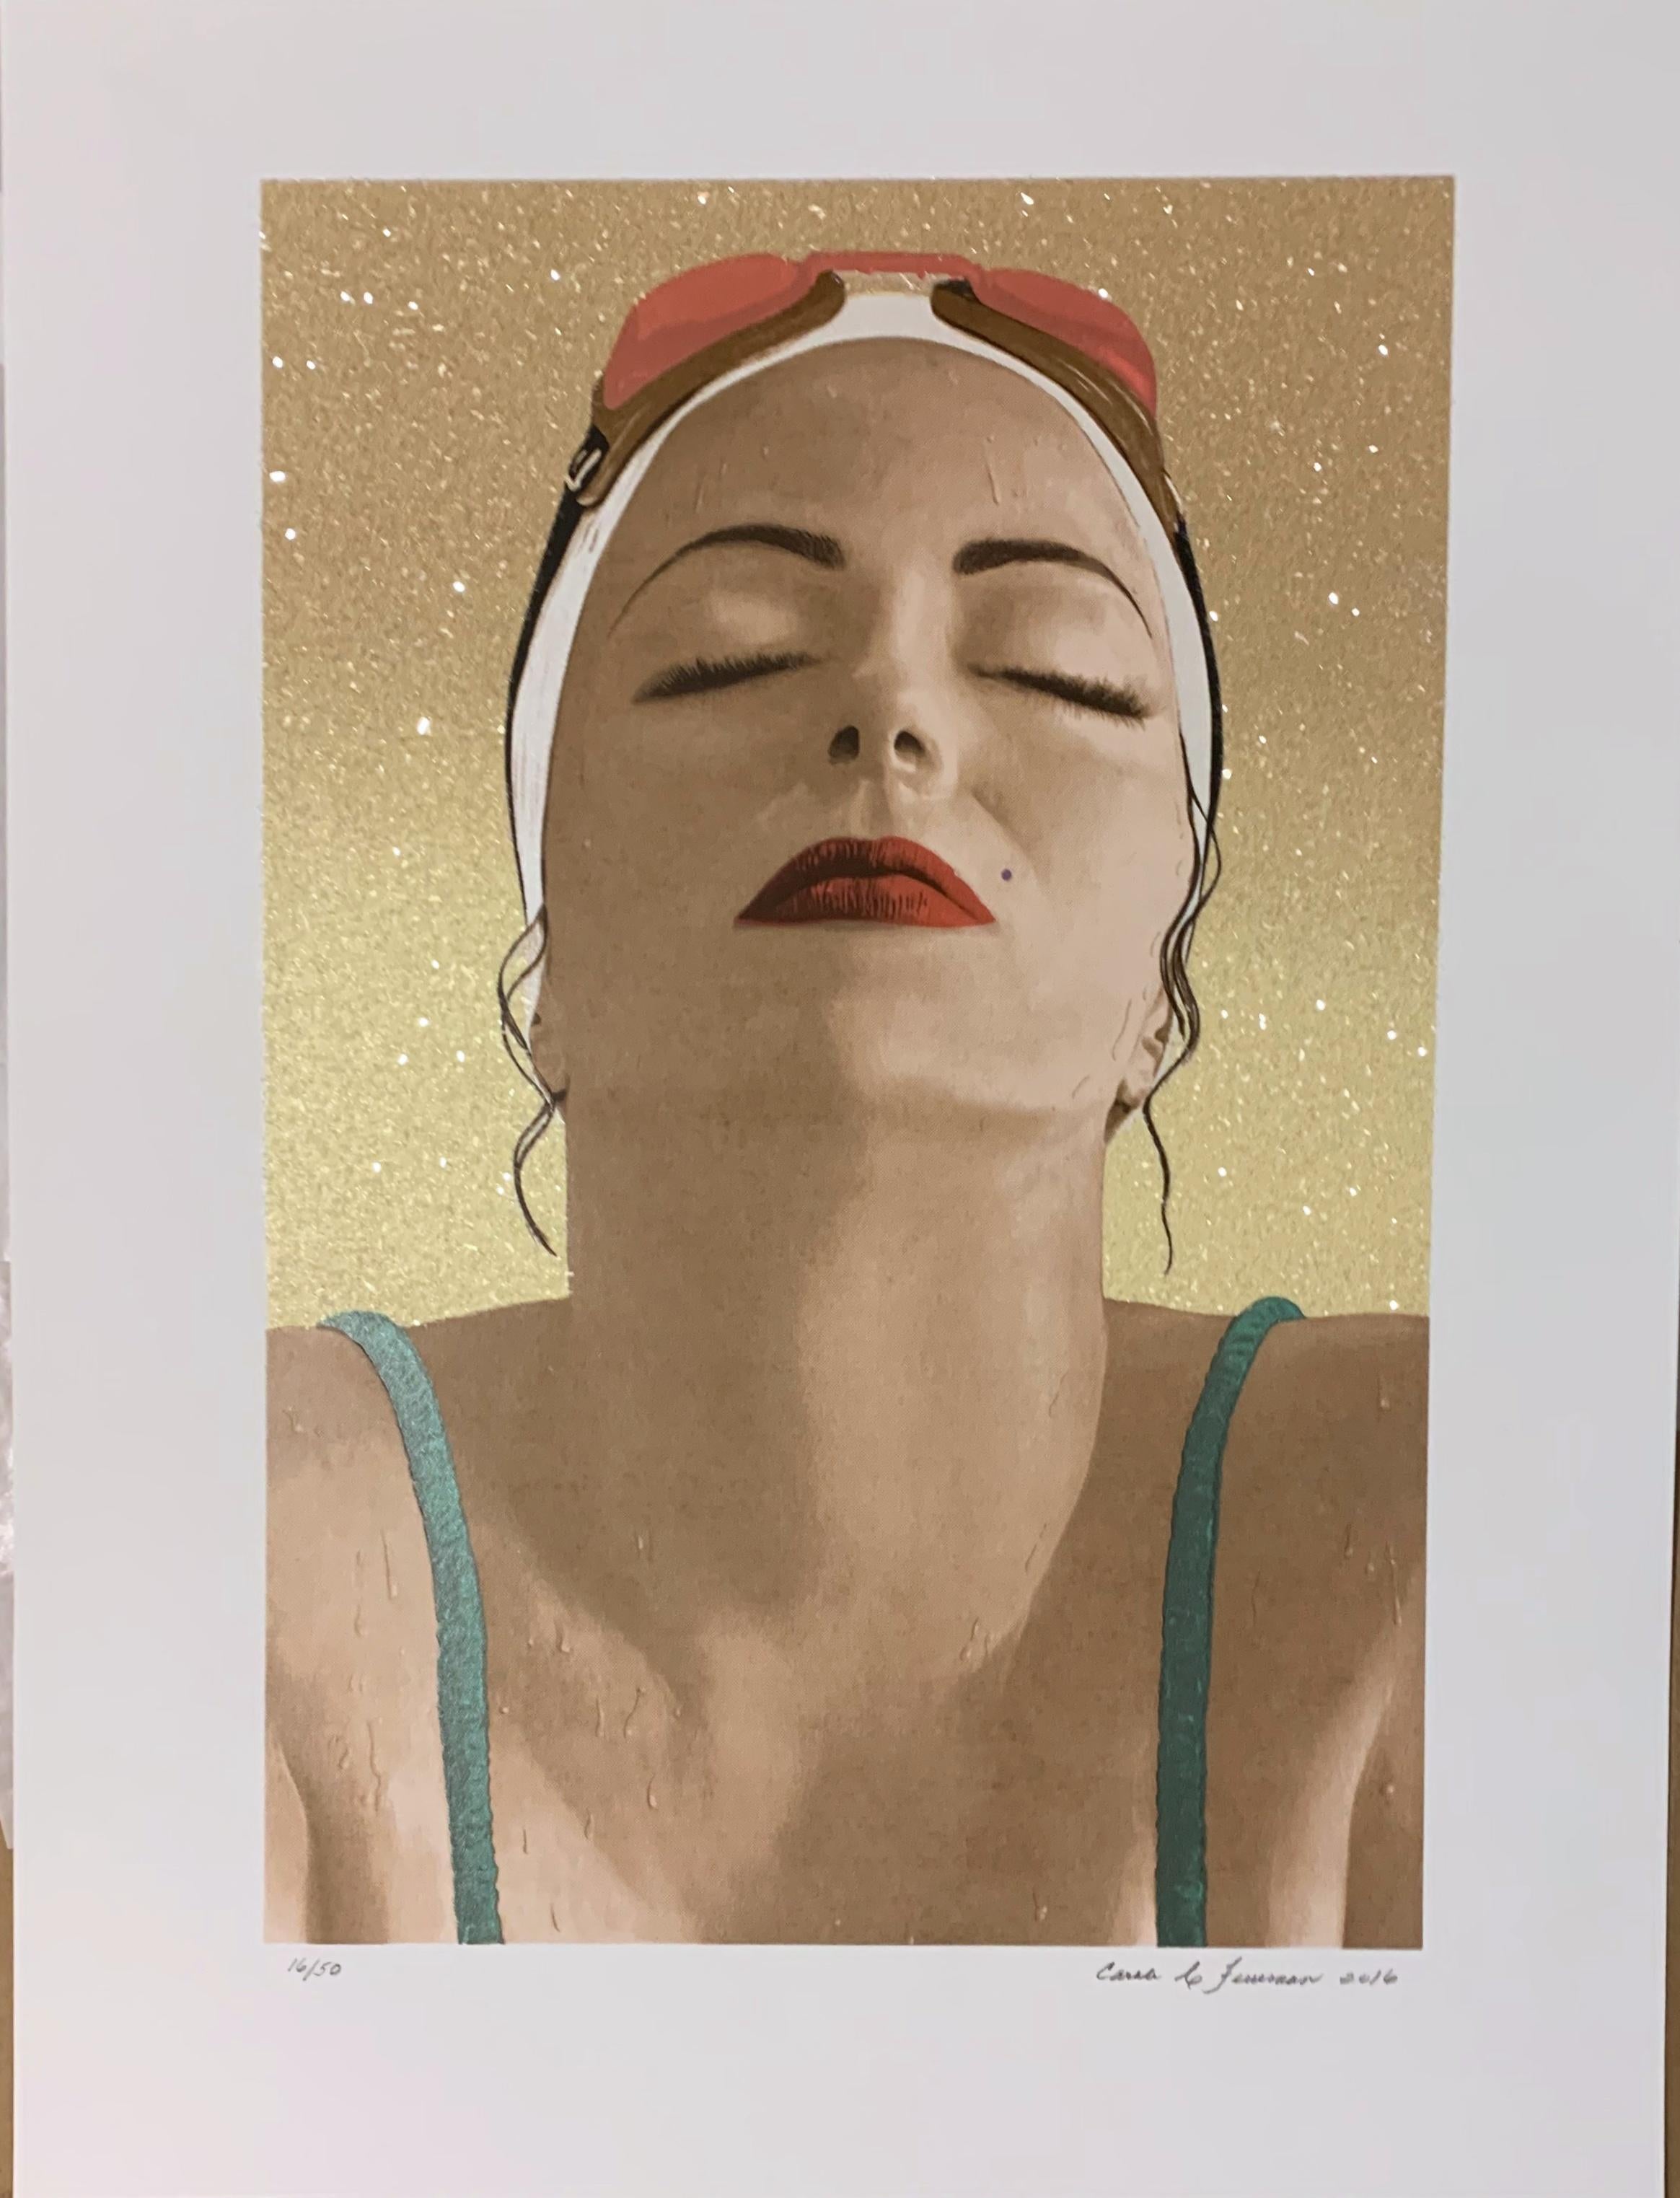 Carole Feuerman
Catalina, 2016
Silkscreen on paper
25 × 19 inches
Pencil signed and numbered from the limited edition of 50
Unframed and in excellent condition